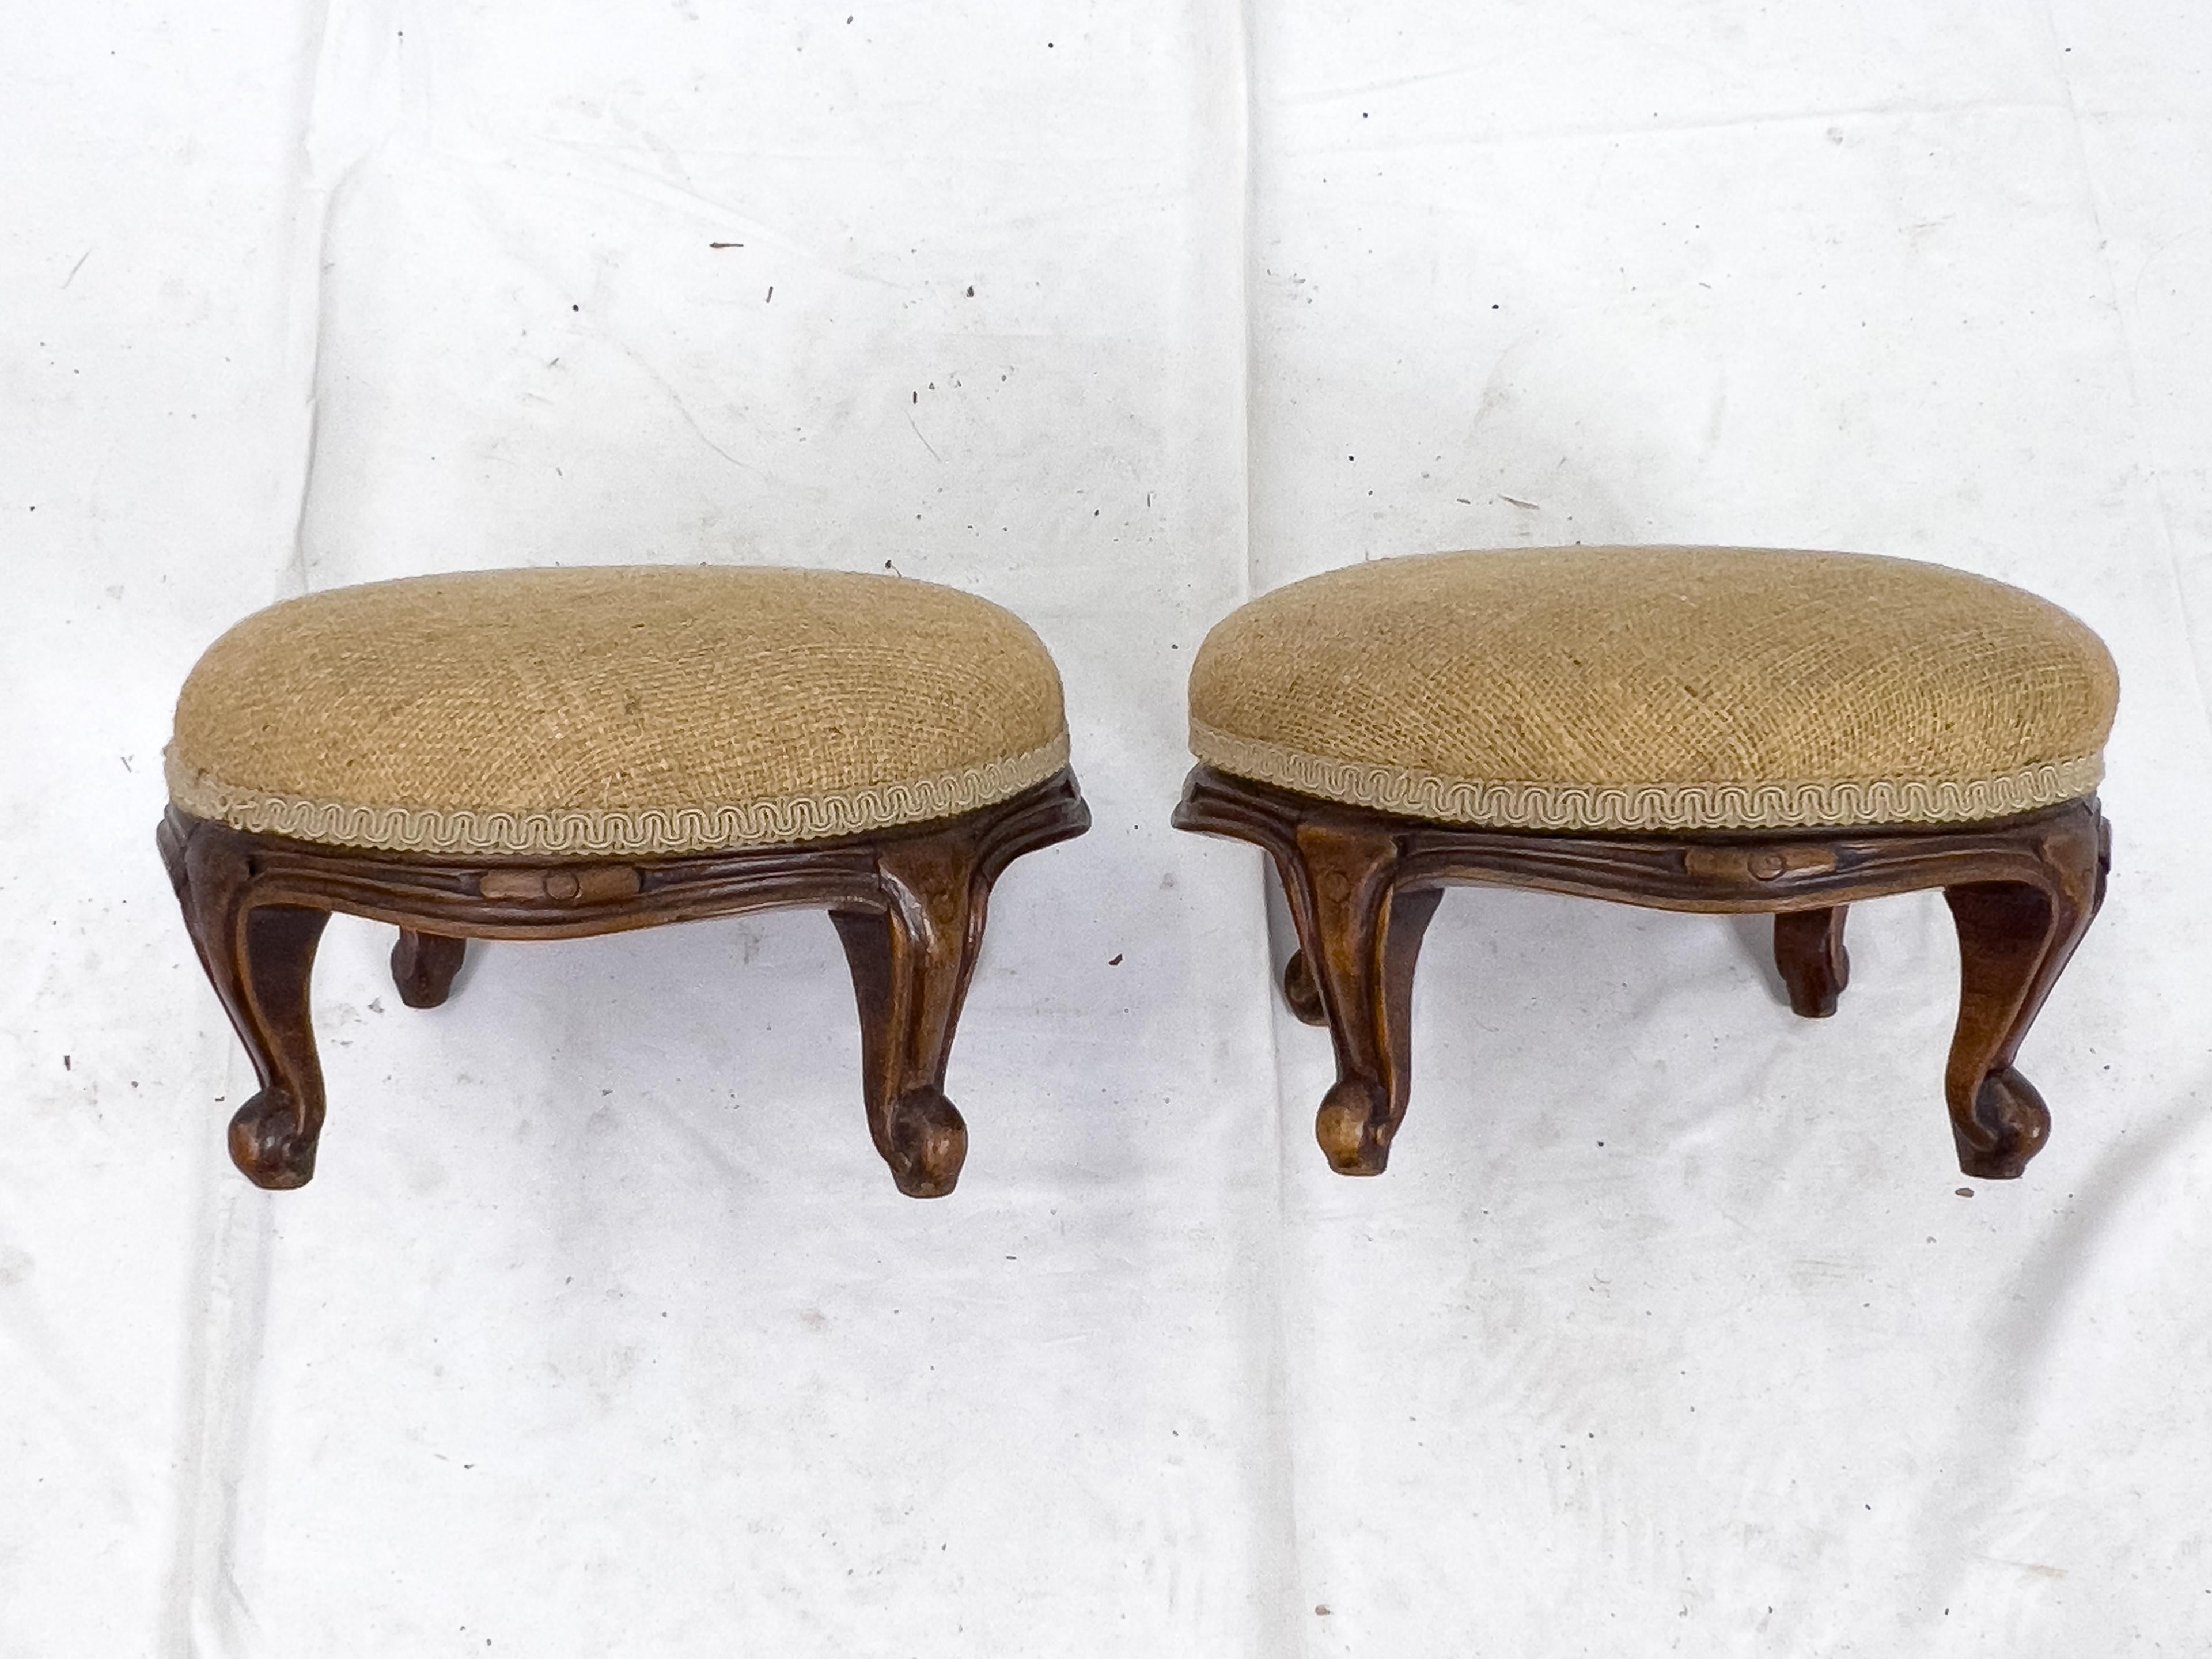 Pair of Small 19th Century Louis XV Style French Walnut and Burlap Foot Stools For Sale 4